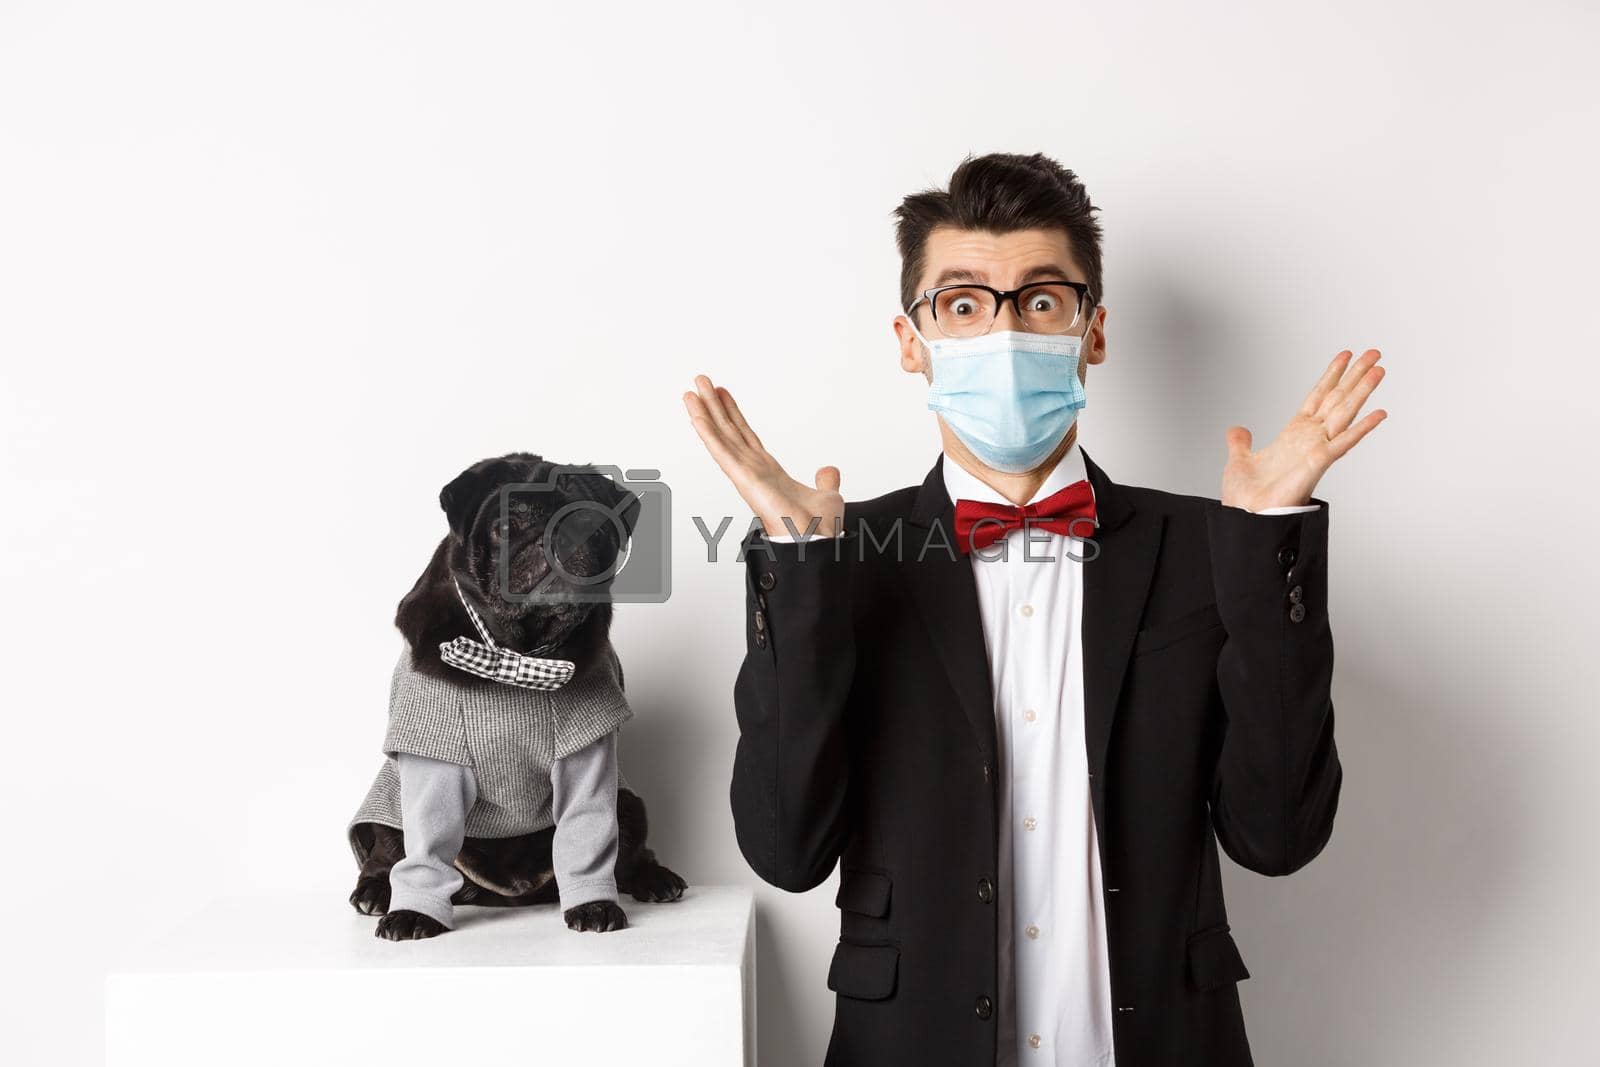 Coronavirus, pets and celebration concept. Amazed young man in face mask and suit staring at camera surprised, cute black dog sitting near owner in party outfit, white background.